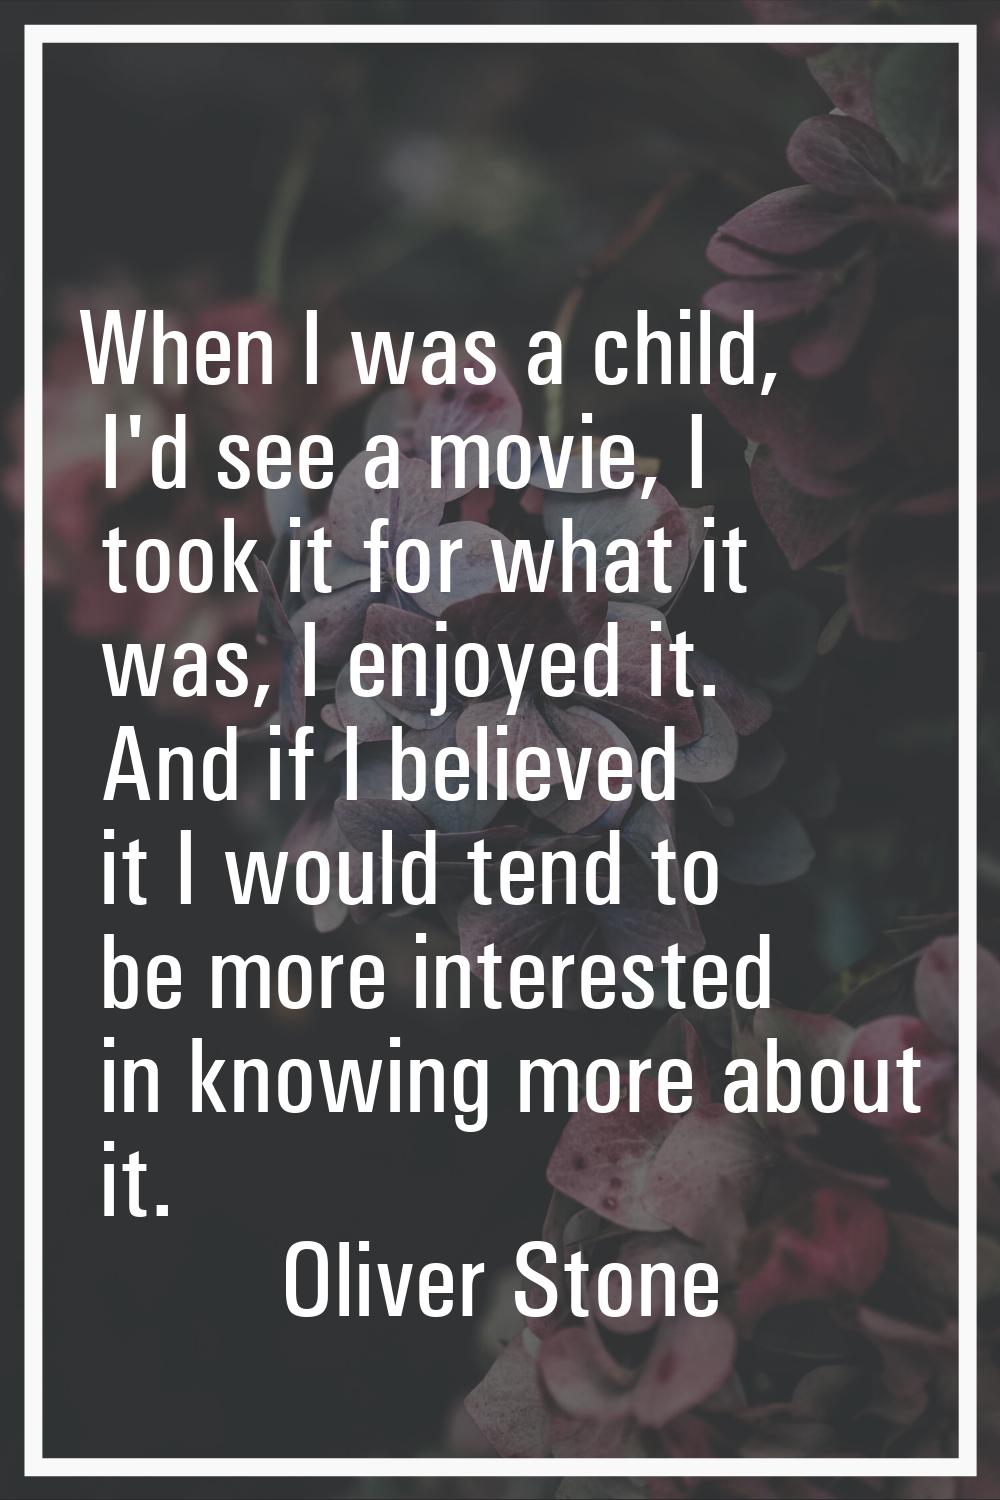 When I was a child, I'd see a movie, I took it for what it was, I enjoyed it. And if I believed it 